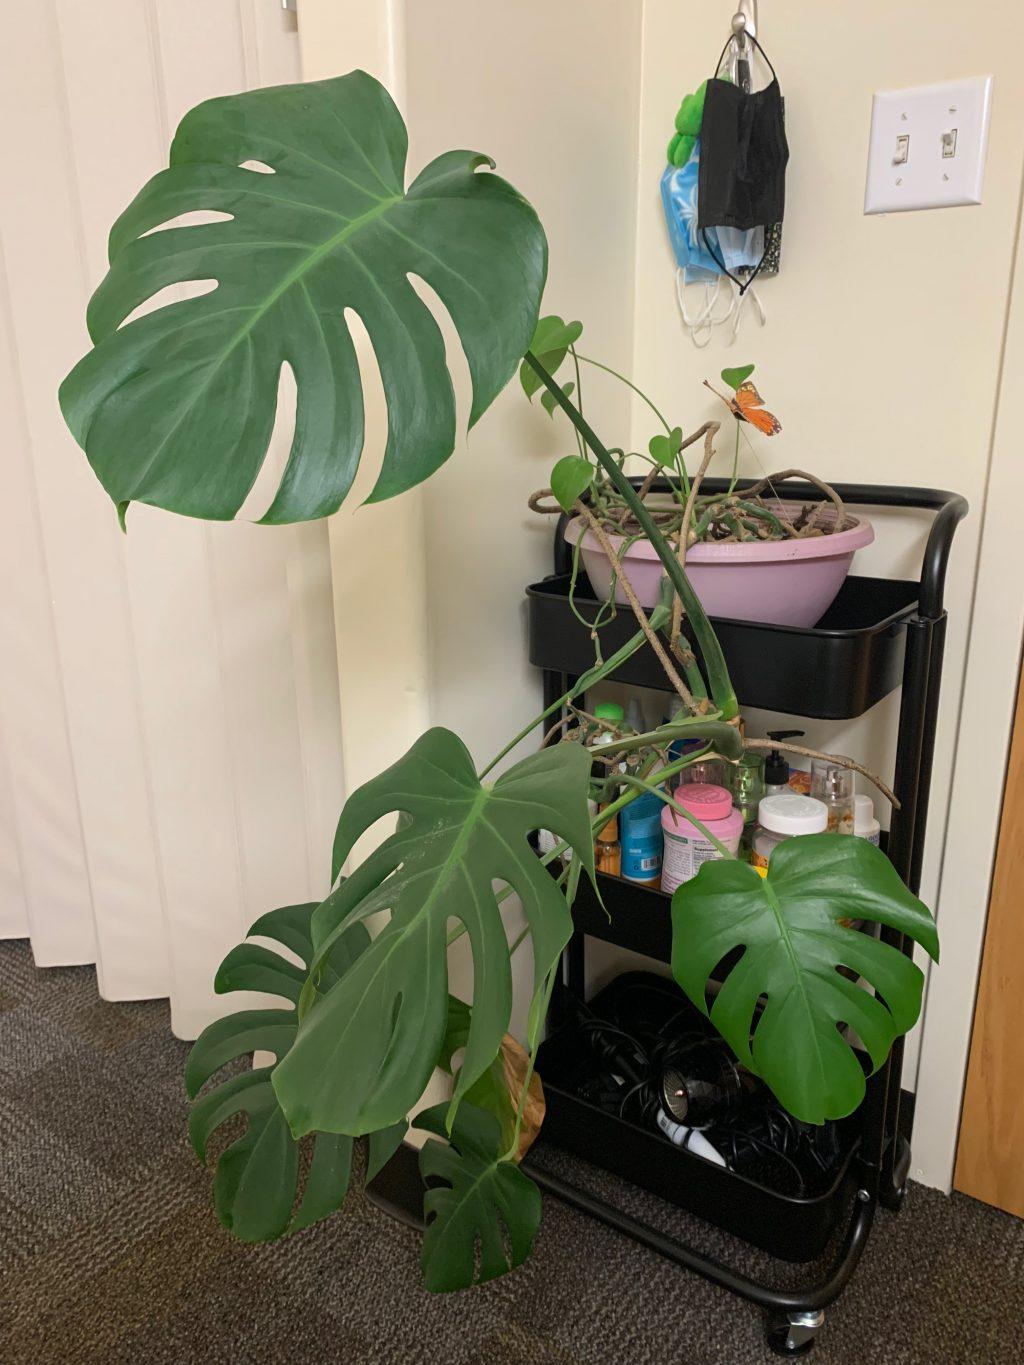 A Monstera plant thrives in Lauren Kinder's dorm. Kinder said the plant is her favorite since it used to belong to her grandmother. Photo courtesy of Lauren Kinder